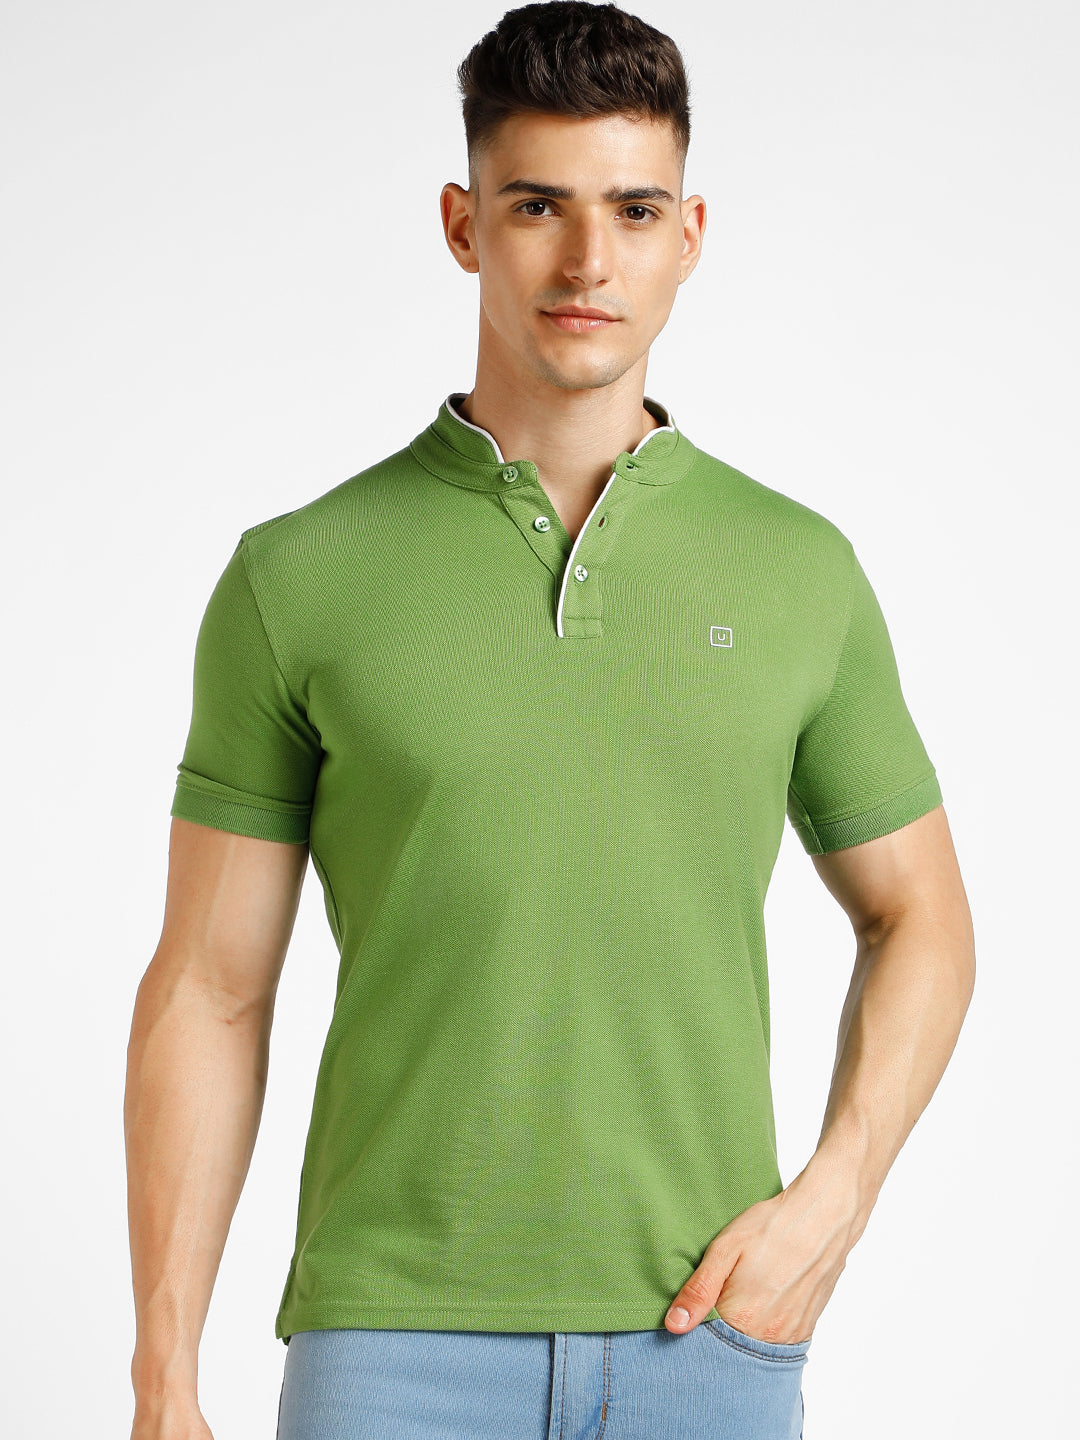 Men's Green Solid Slim Fit Half Sleeve Cotton Polo T-Shirt with Mandarin Collar